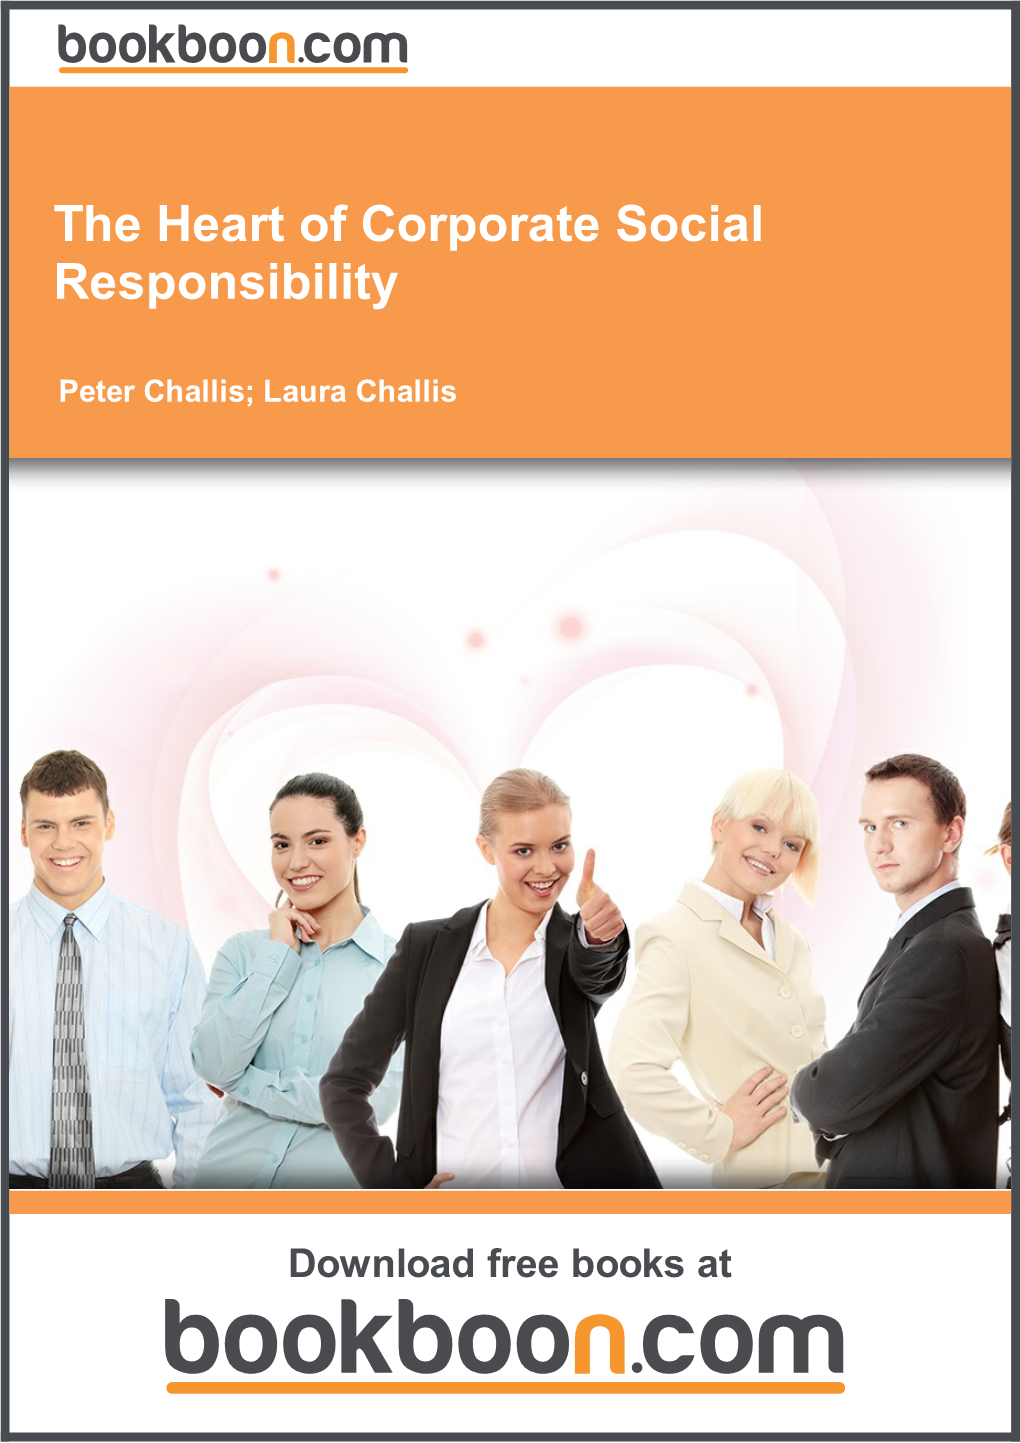 The Heart of Corporate Social Responsibility